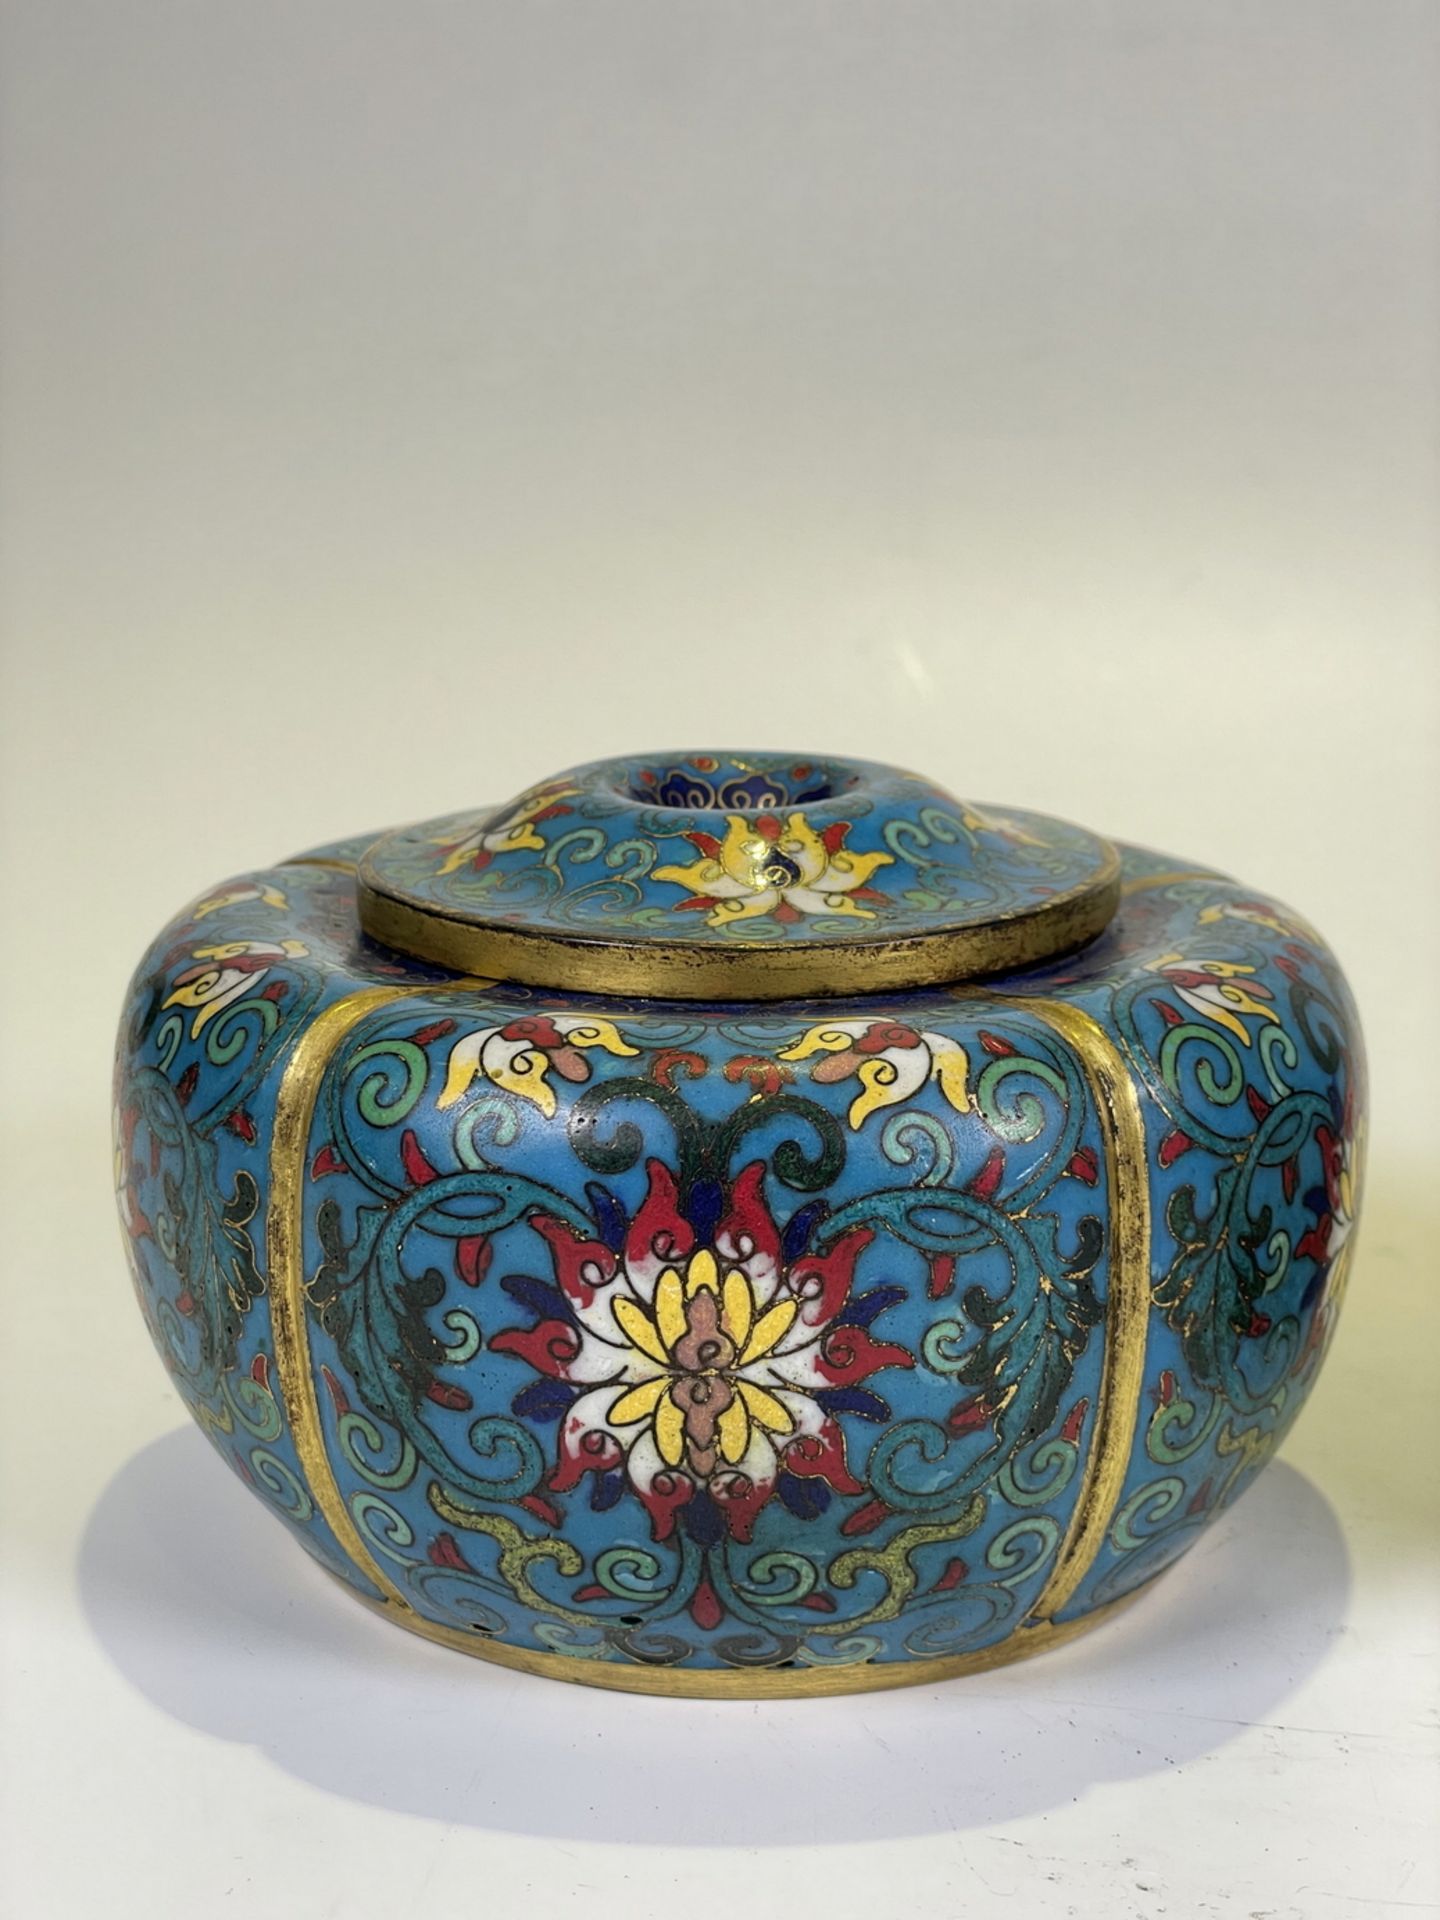 FINE CHINESE CLOISONNE, 18TH/19TH Century Pr. Collection of NARA private gallary.  - Image 3 of 6